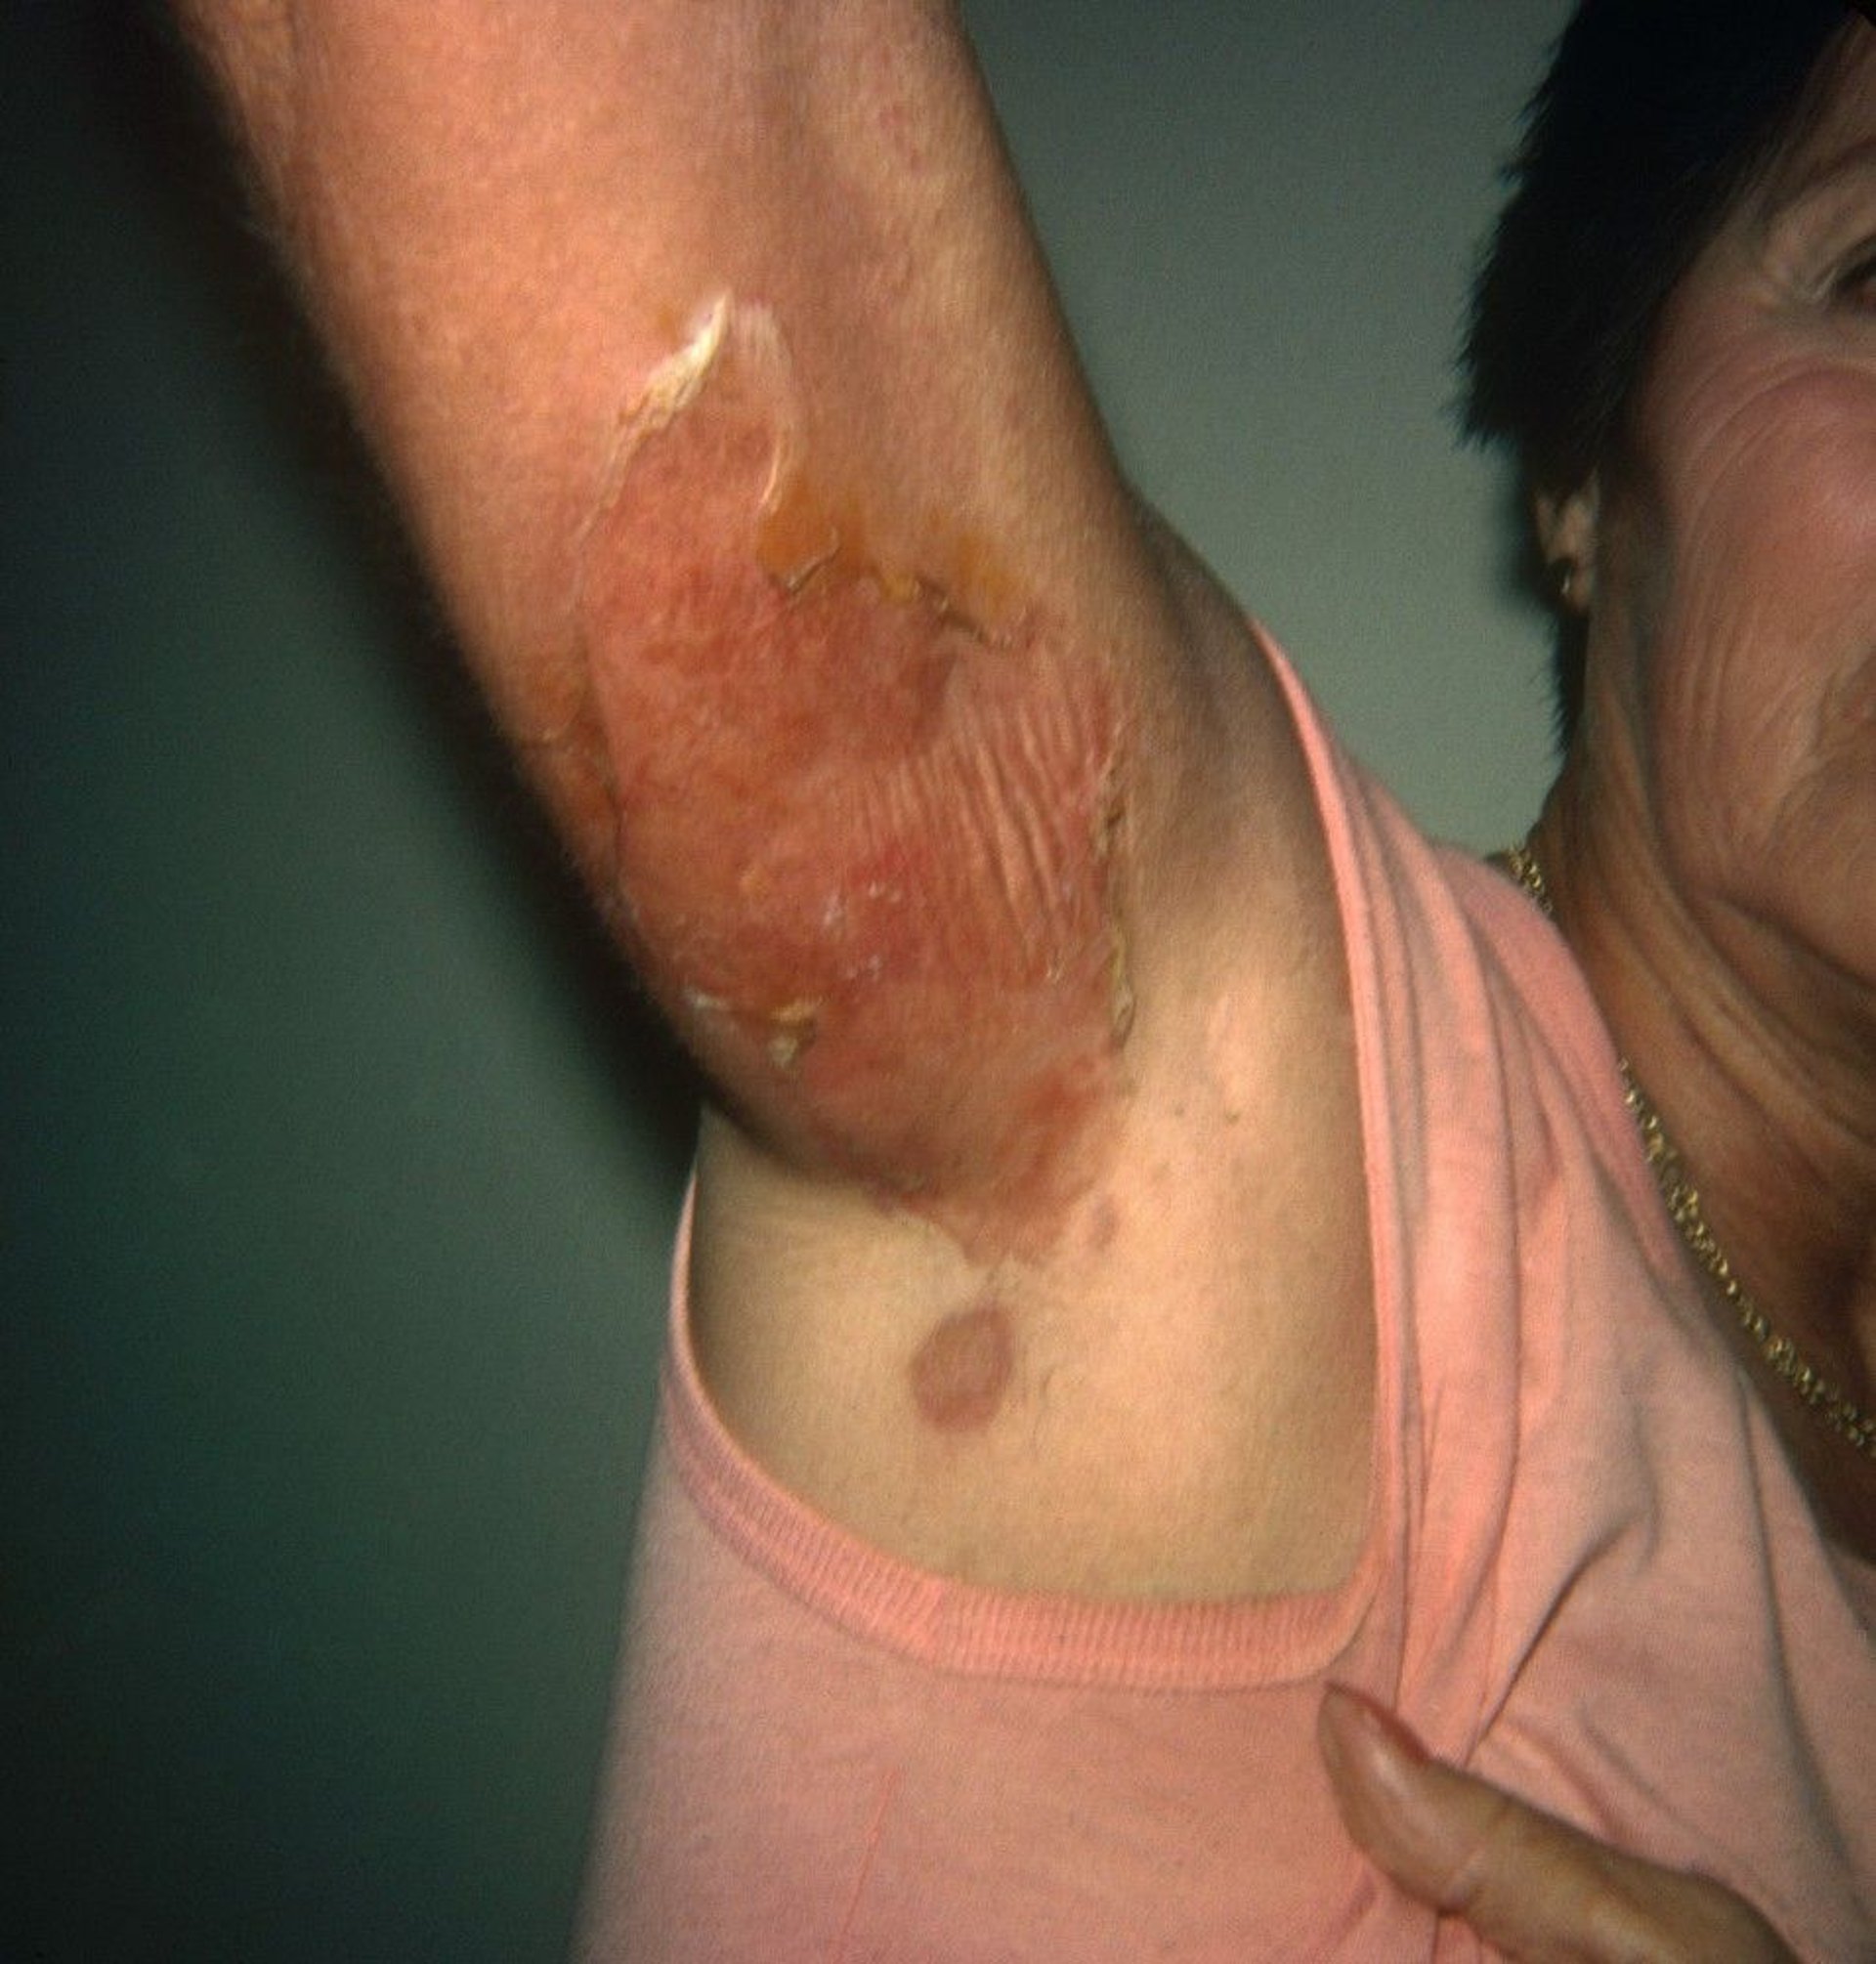 Staphylococcal Scalded Skin Syndrome (Adult)